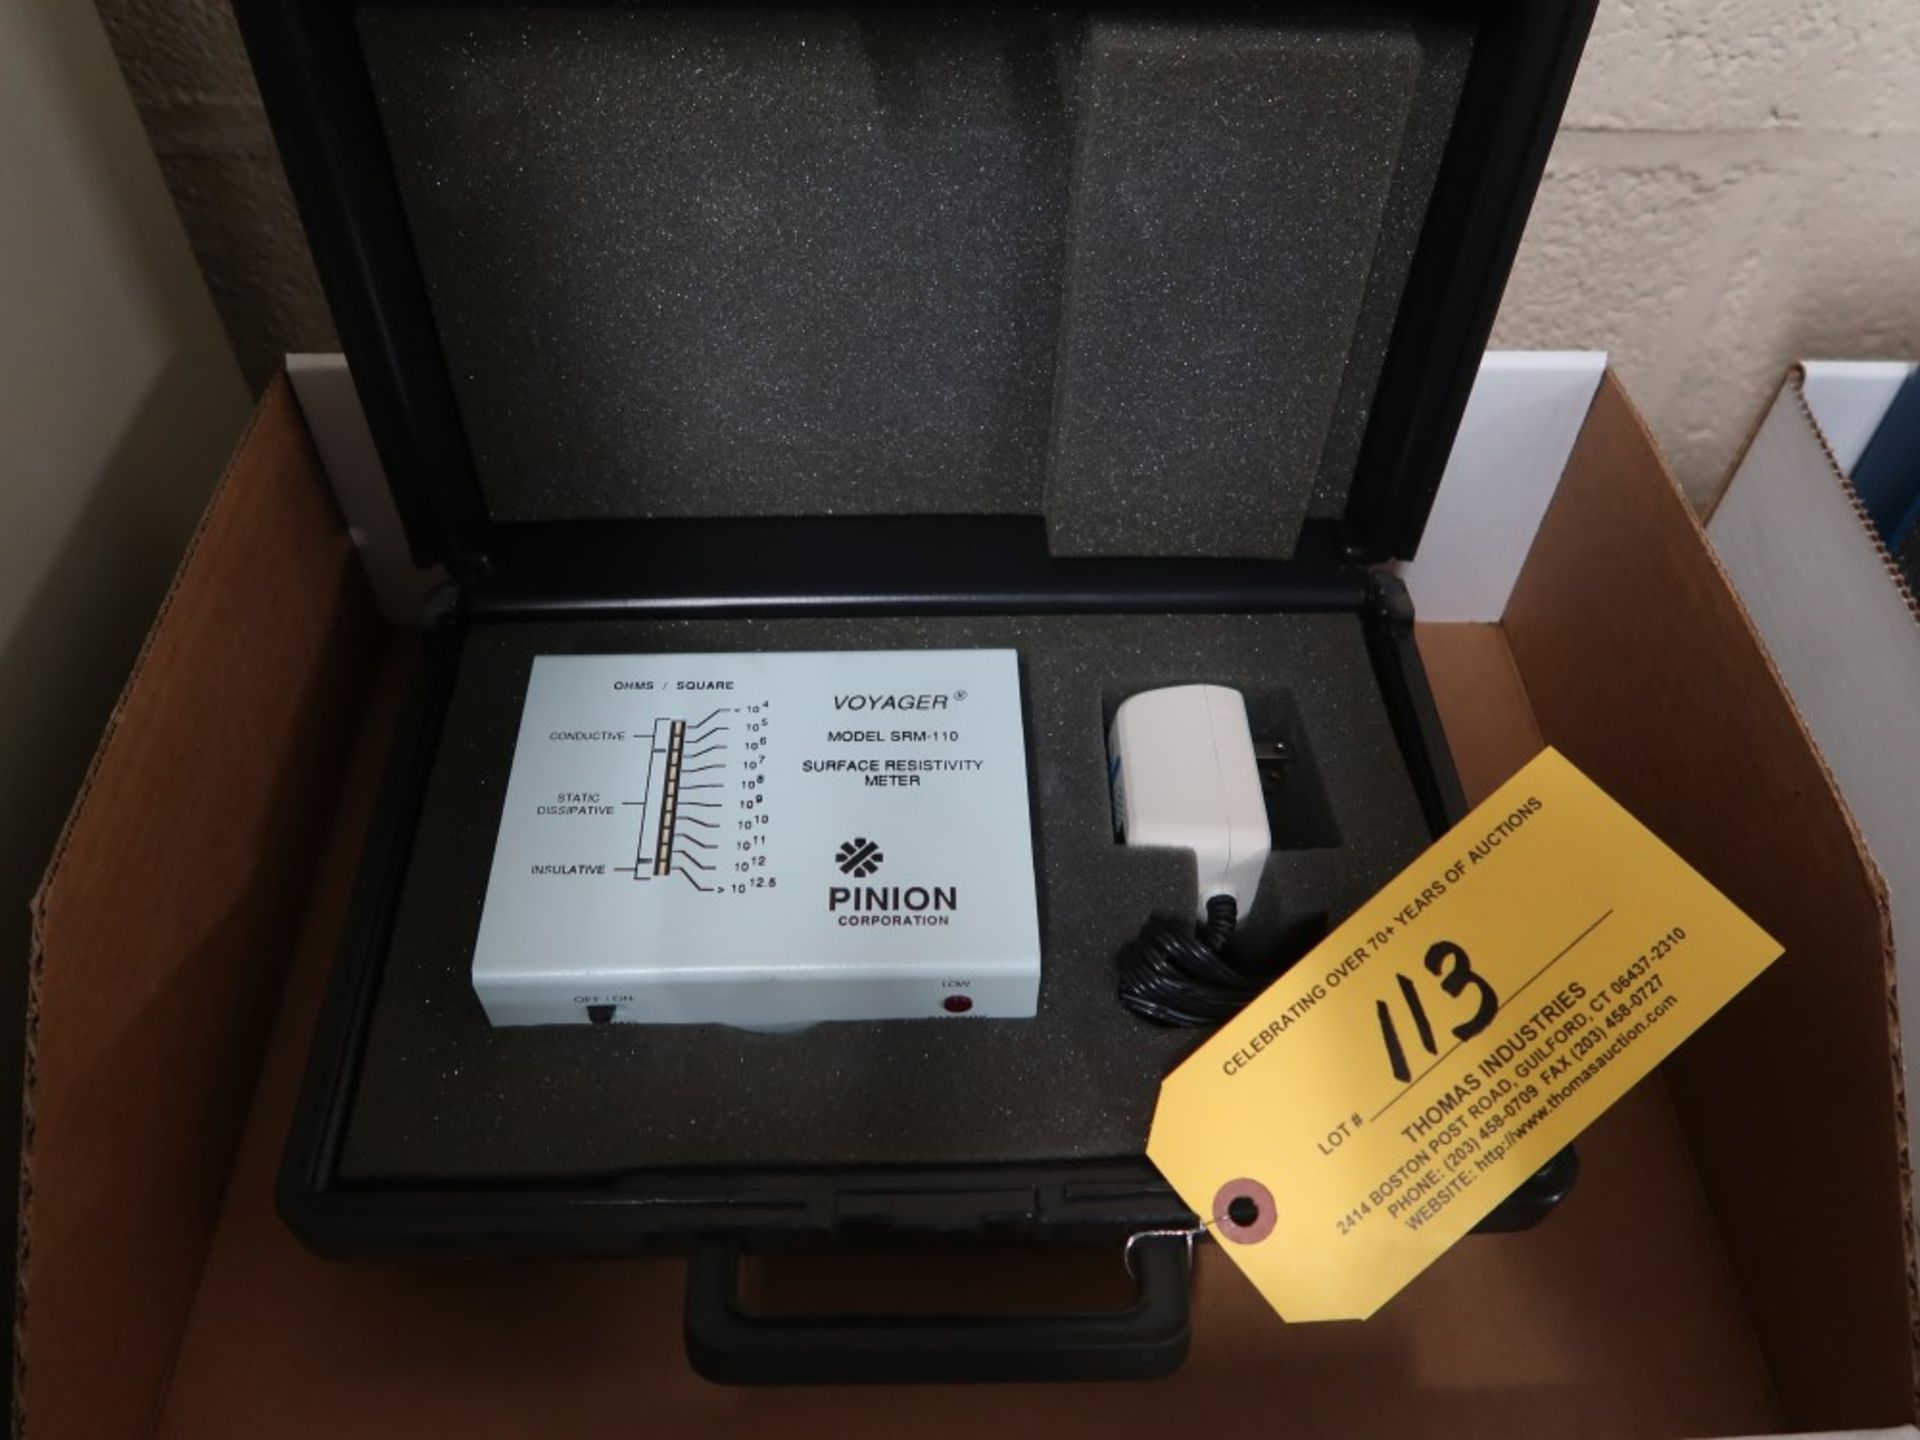 Pinion Corp Voyager Model SRM-110 Surface Resistivity Meter